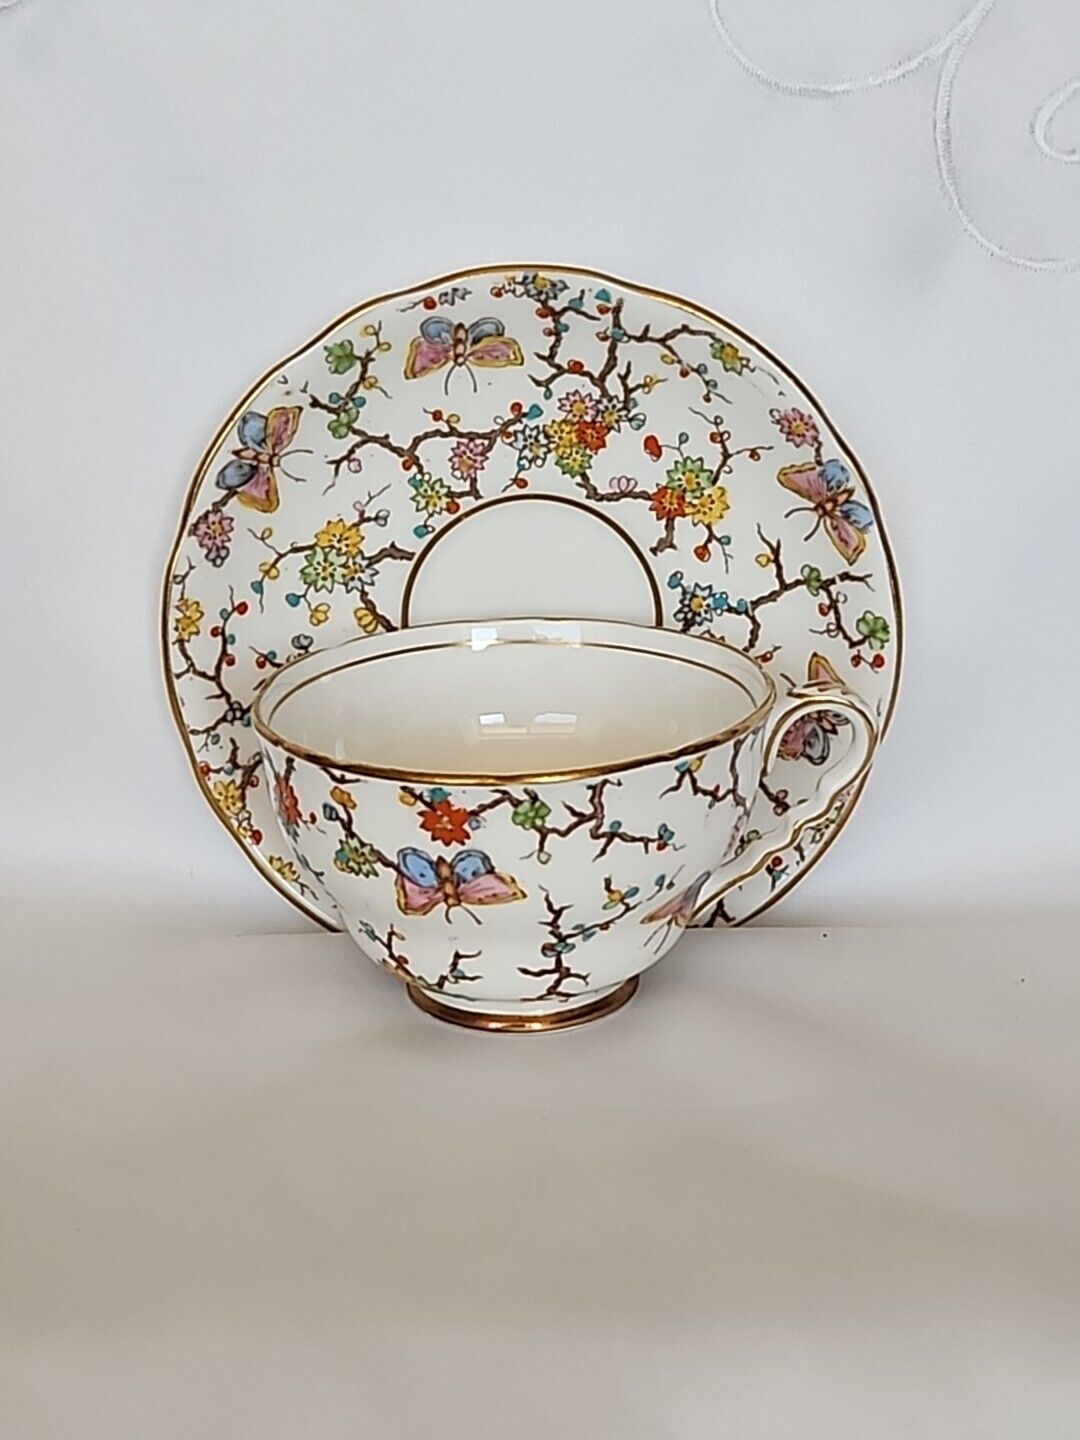 LOVELY ROYAL STAFFORD TEA CUP & SAUCER BUTTERFLY & FLORAL BONE CHINA ENGLAND